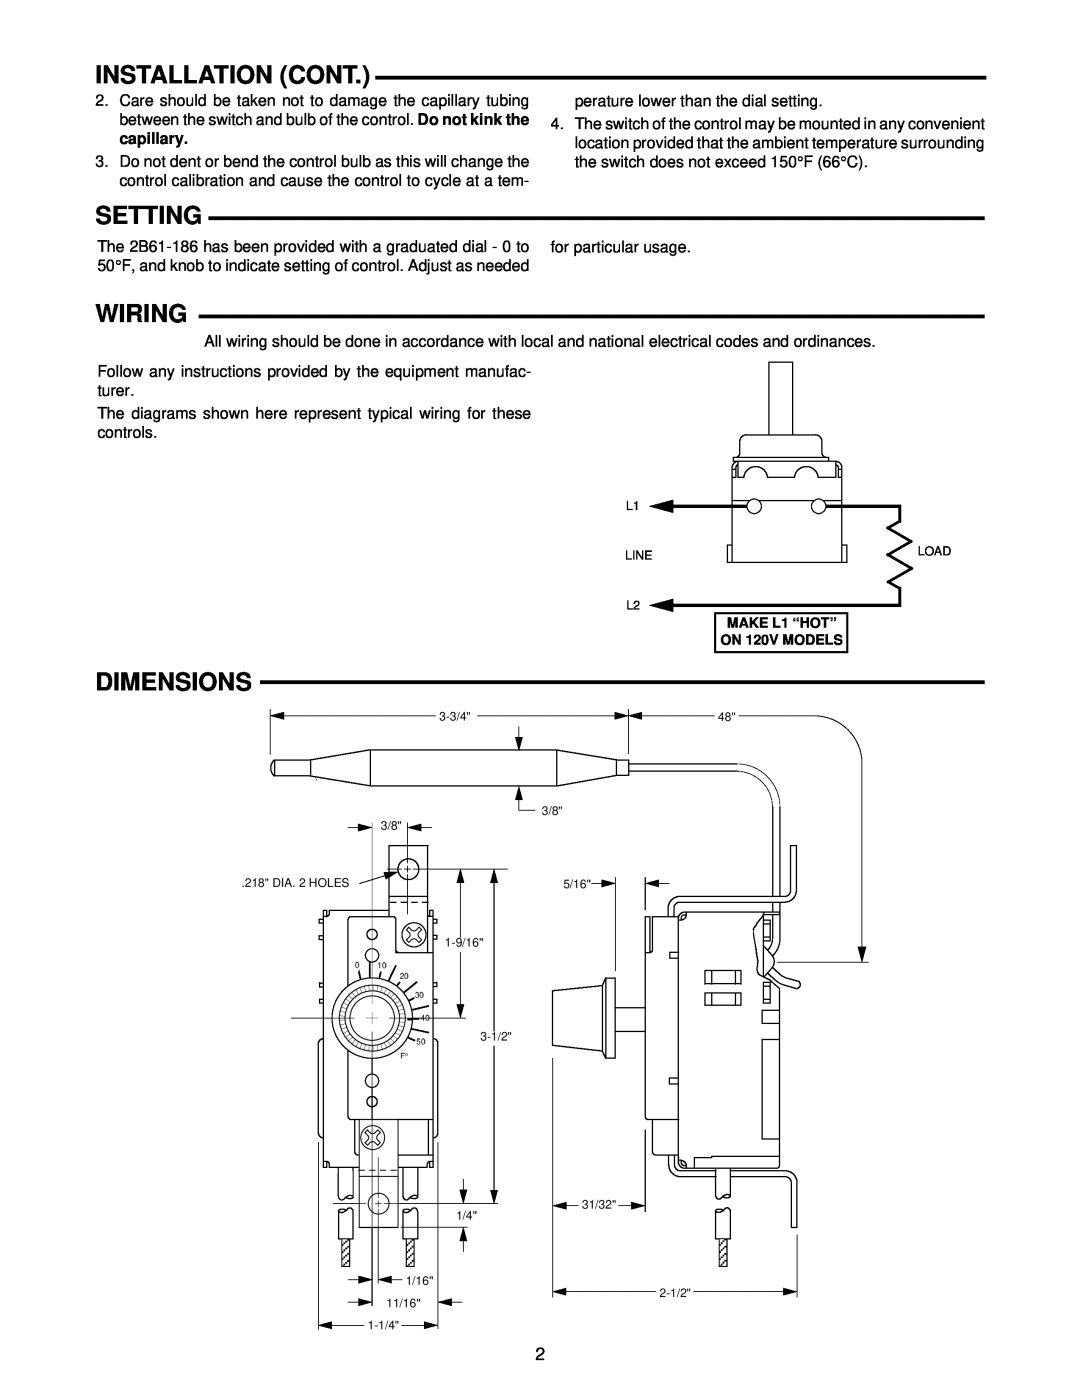 White Rodgers 2B61-186 installation instructions Installation Cont, Setting, Wiring, Dimensions 